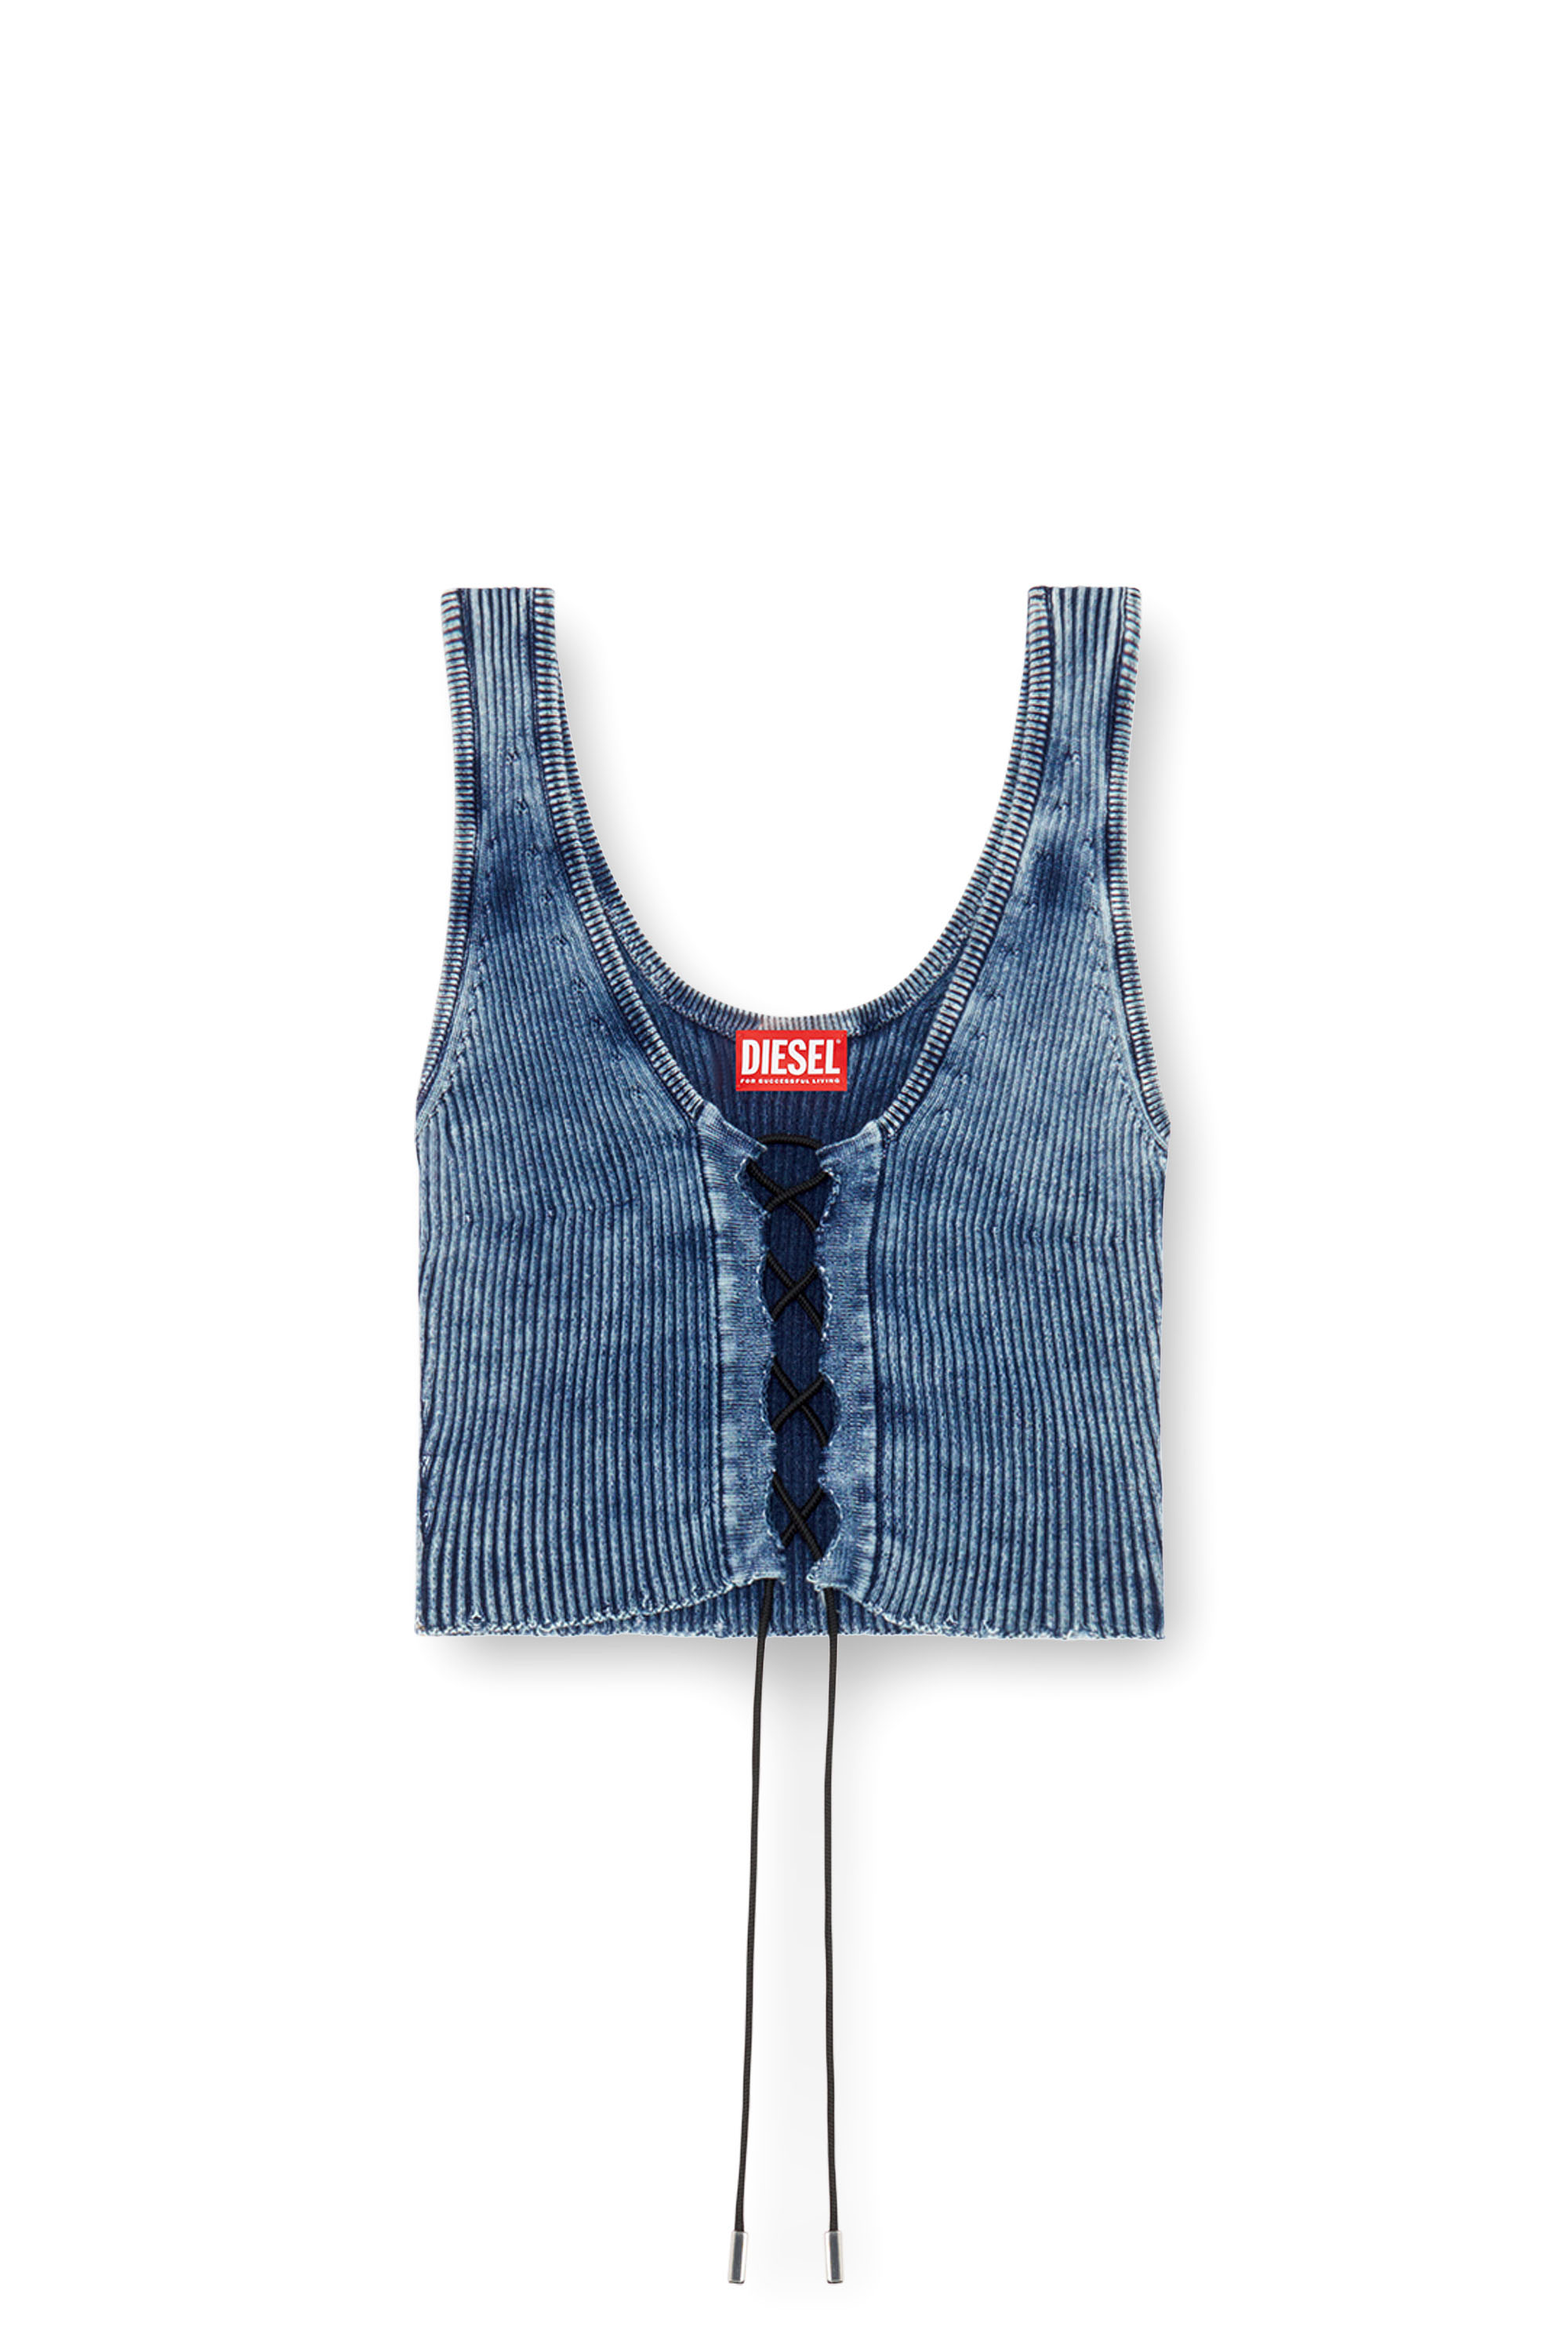 Diesel - M-ADONE, Female Cropped lace-up tank top in indigo knit in ブルー - Image 3